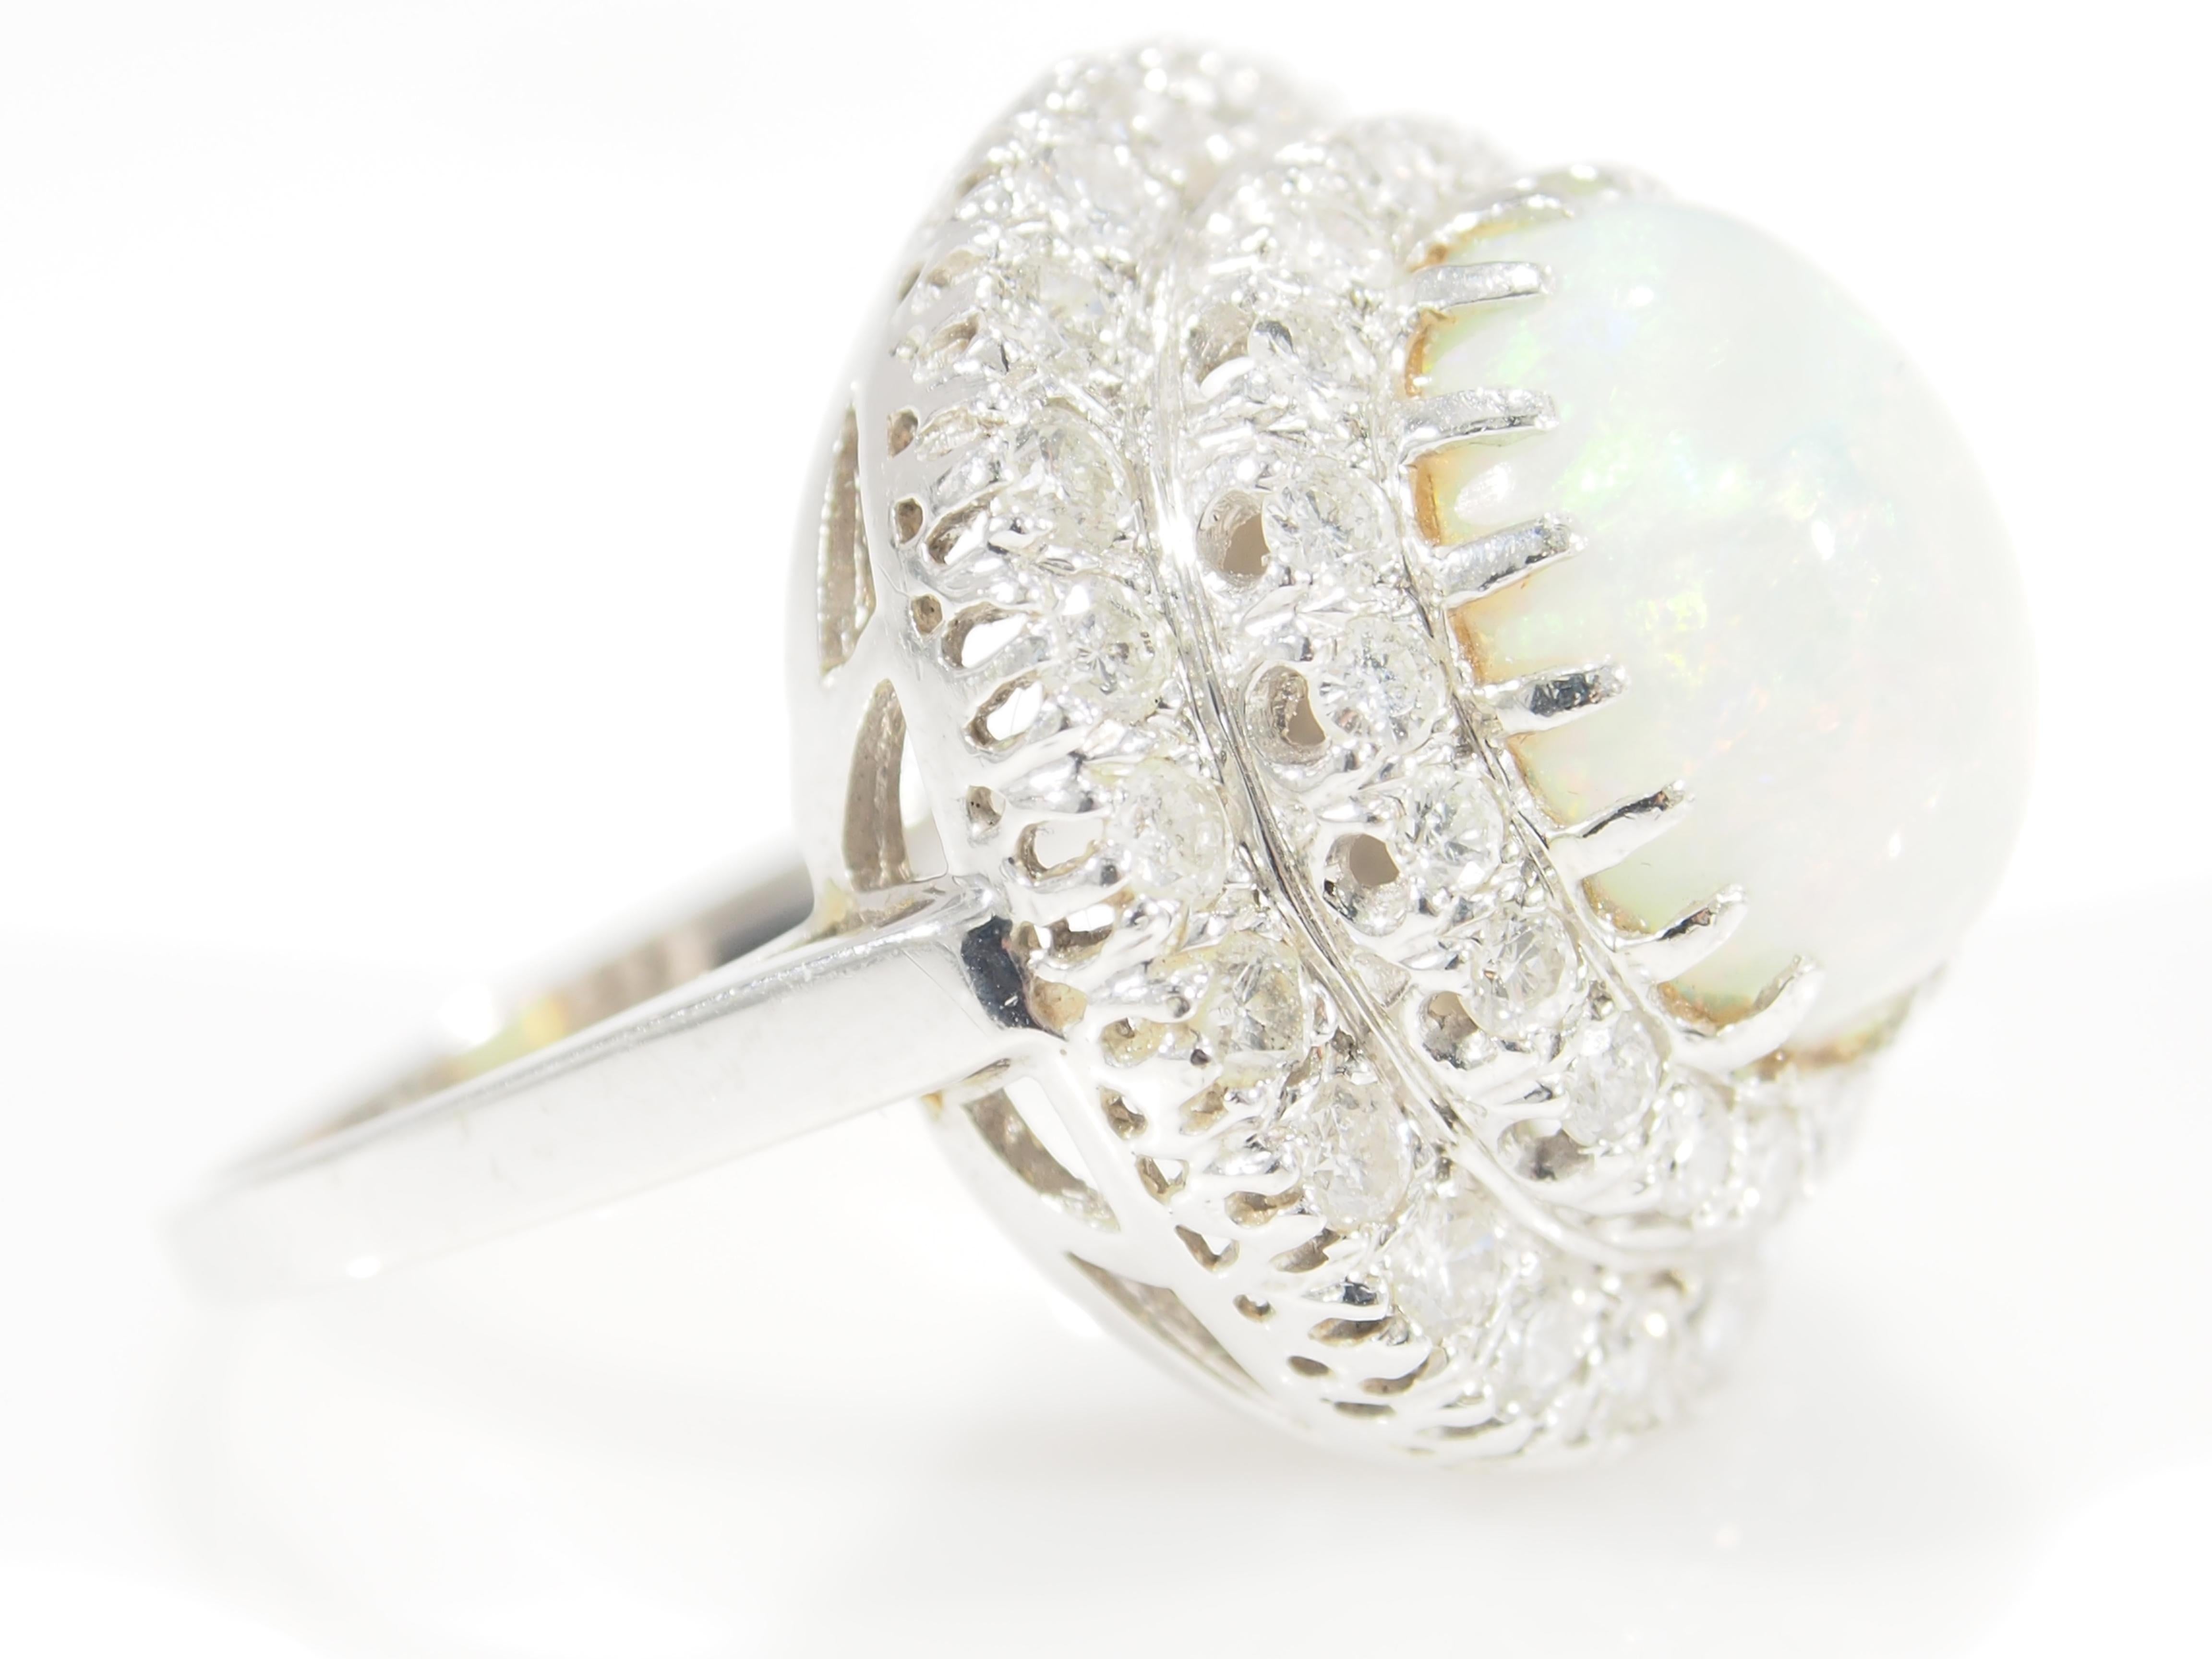 This is a classic Cabochon Opal Ring designed in 14K White Gold set in a Double Halo. The Opal is 4.57ctw. and is surrounded by (42) Round Brilliant Cut Diamonds, approximately 1.33ctw, H-K in Color, VS-I1 in Clarity. This splendid Ring is 3/4 inch